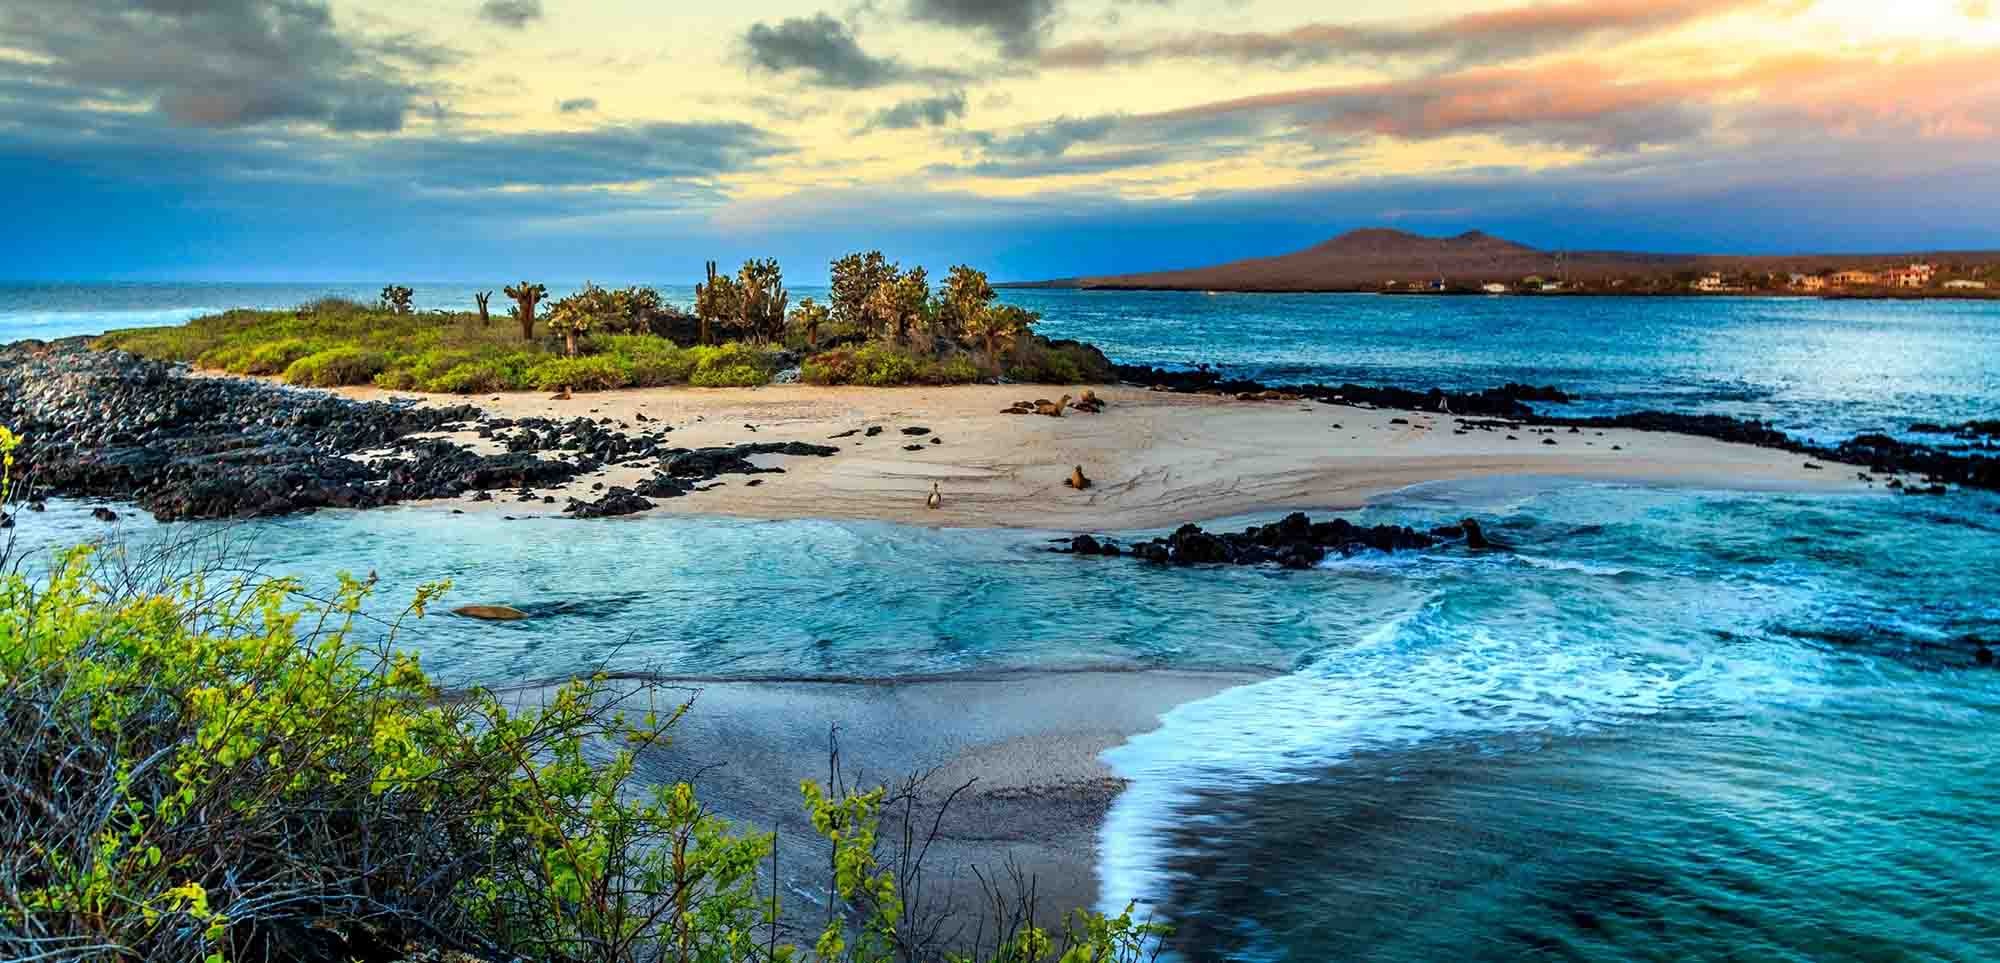  Galapagos | 10 Interesting Facts About the Galapagos Islands